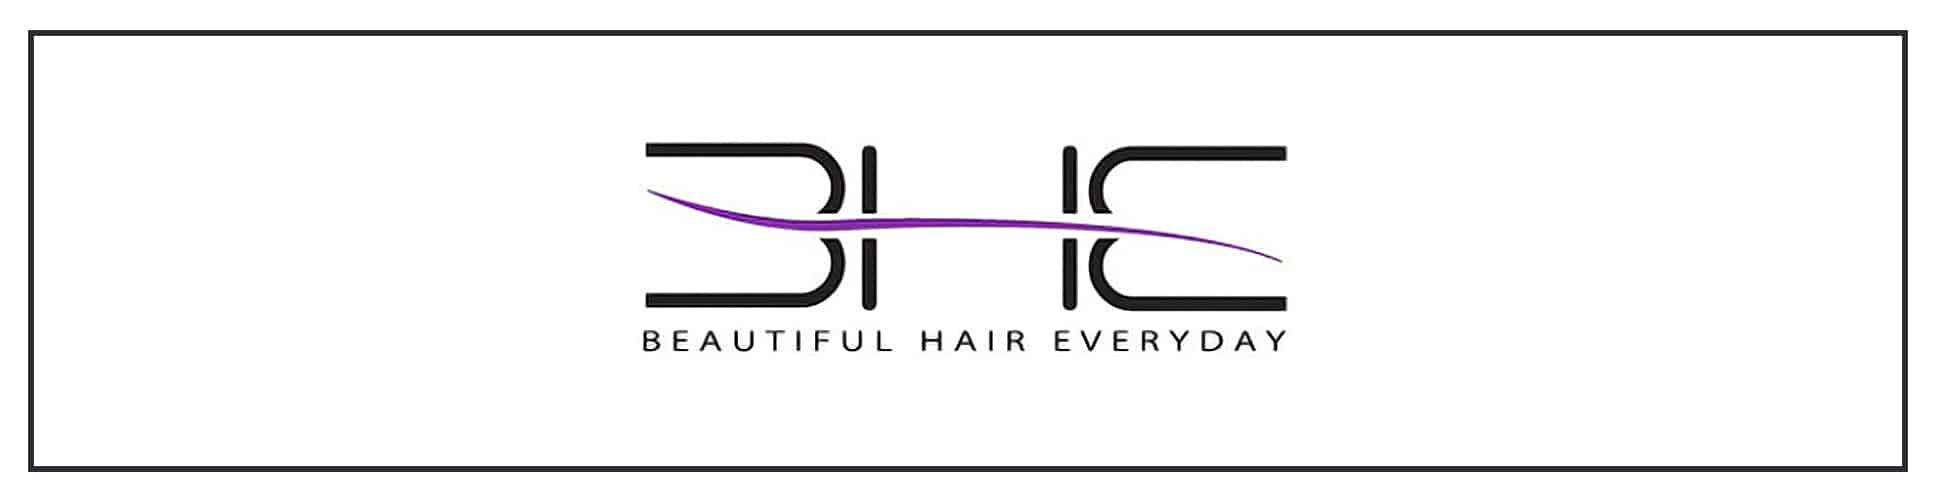 A logo for beautiful hair everyday.